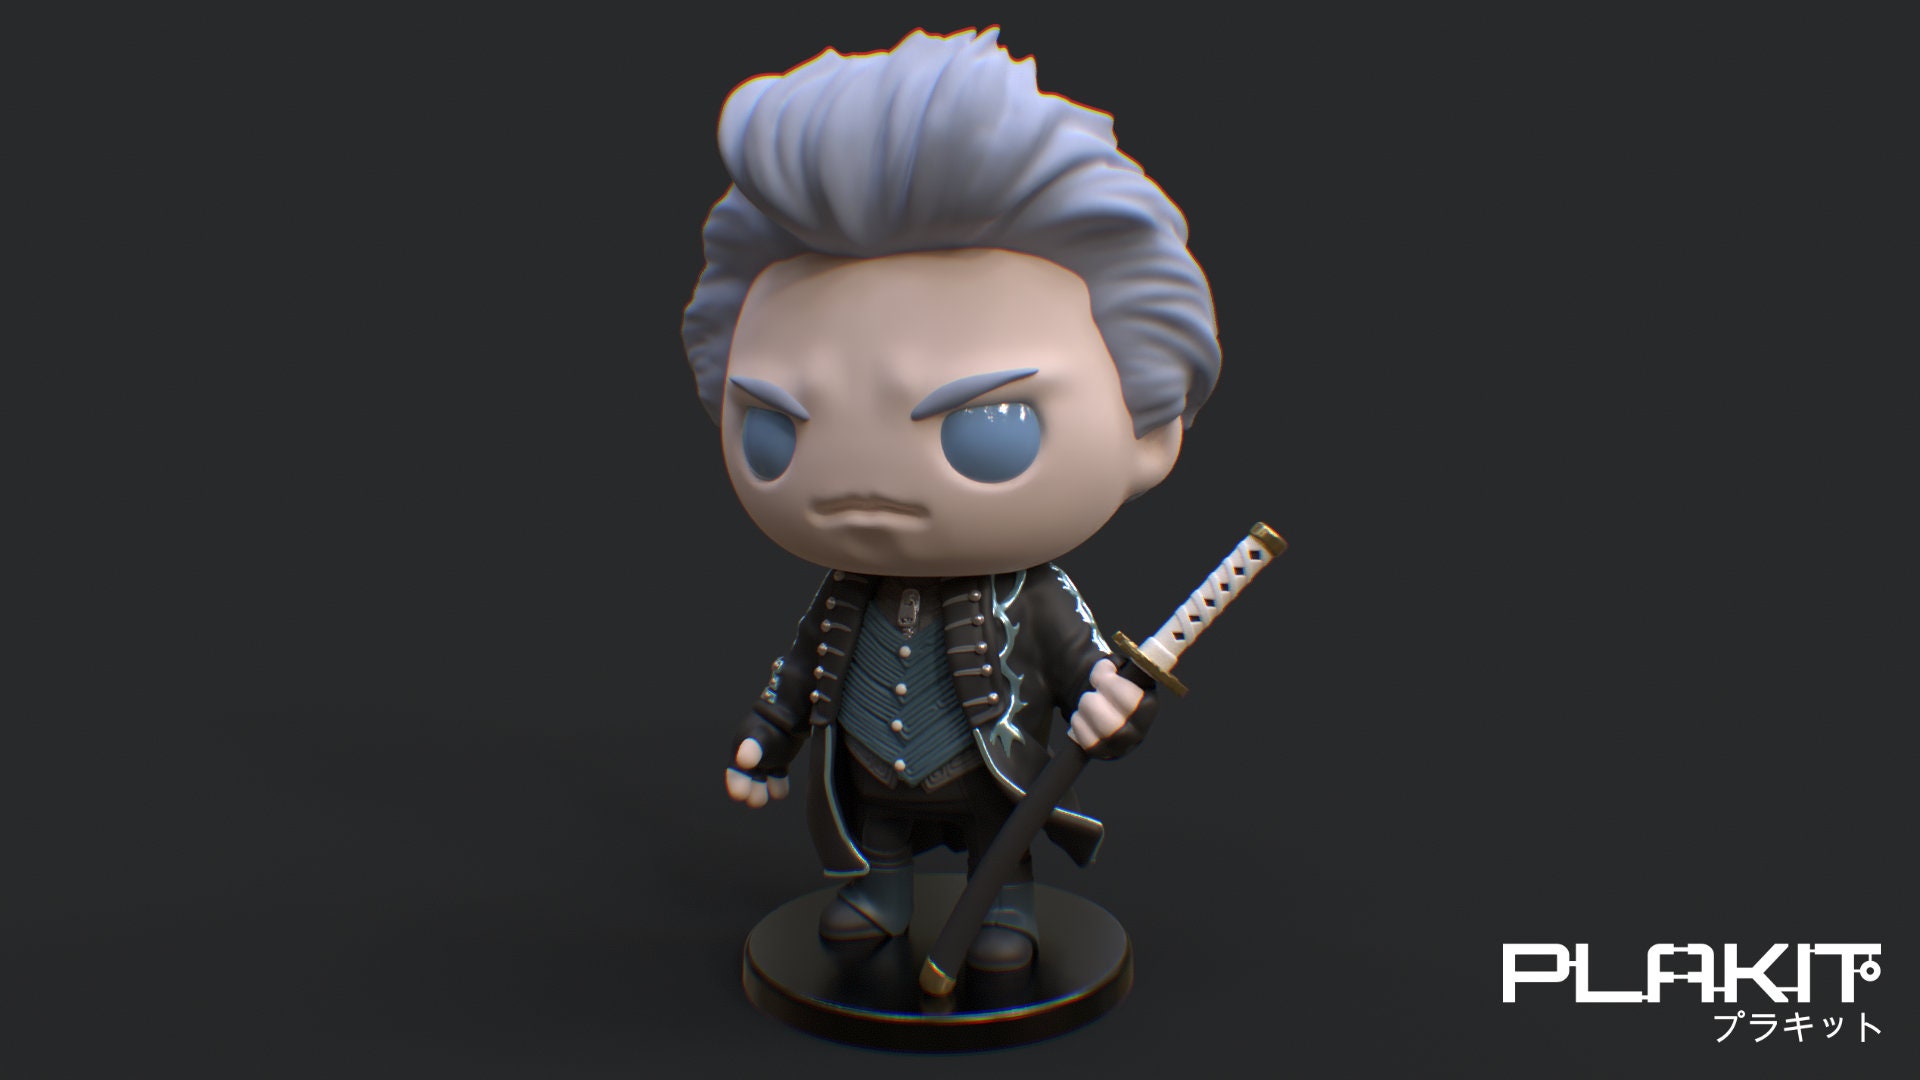 I like dmc: devil may cry Virgil clothes better the dmc 5 Vergil cloths  tell me your opinion : r/DevilMayCry